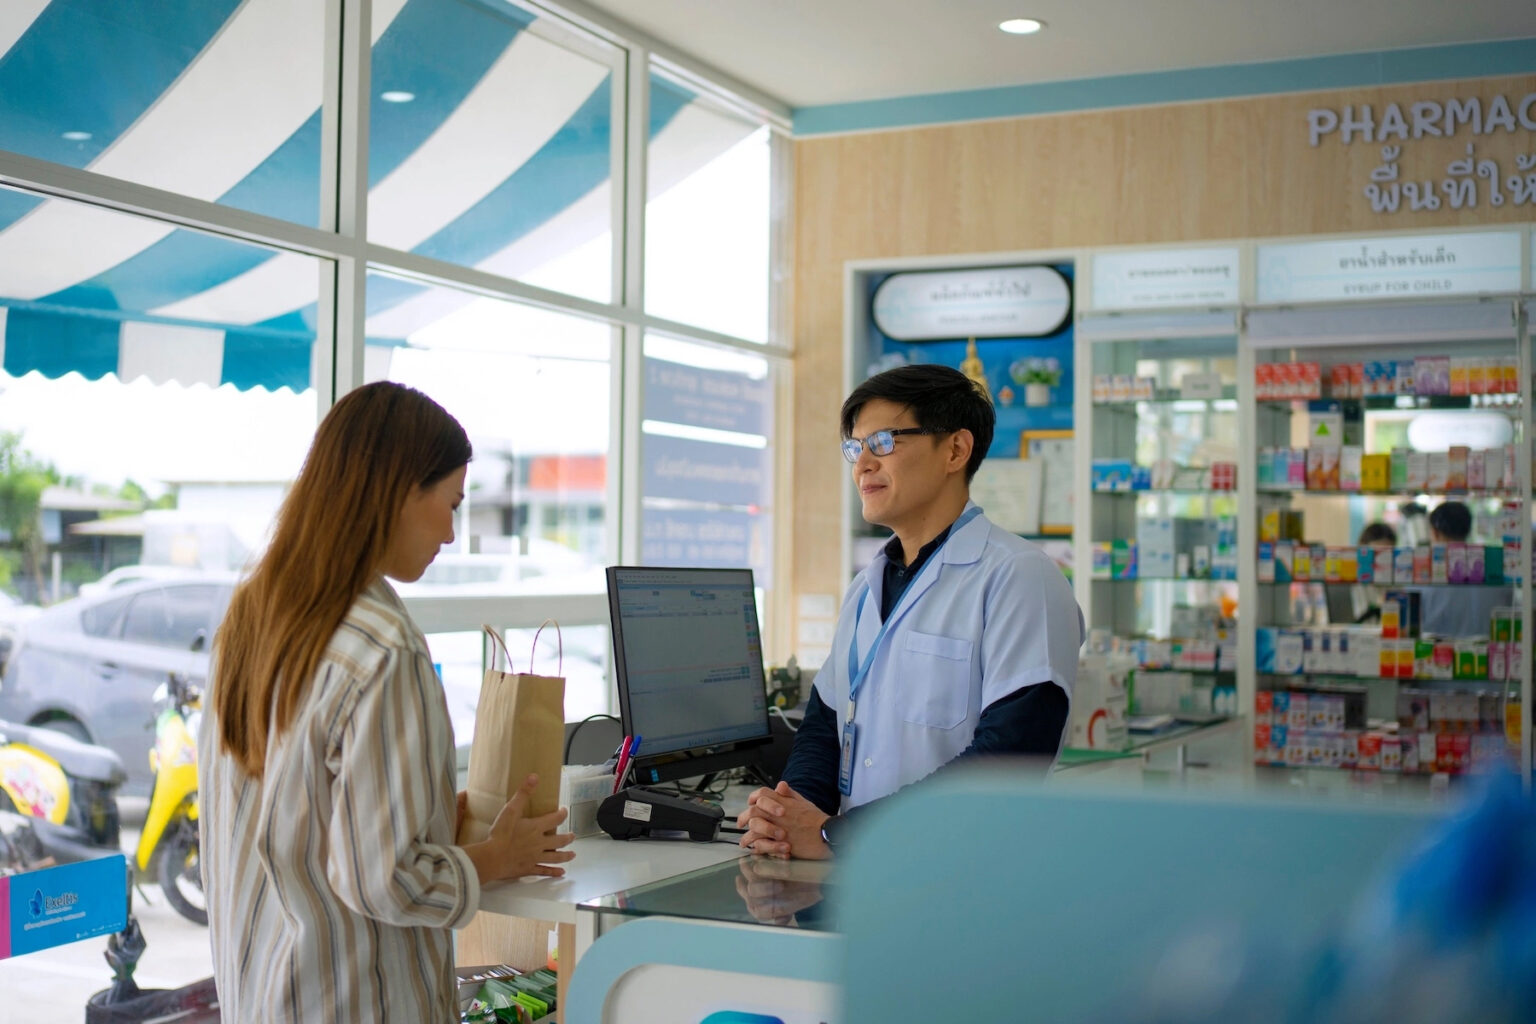 A patient stands at the counter and discusses her script or medication with the pharmacist